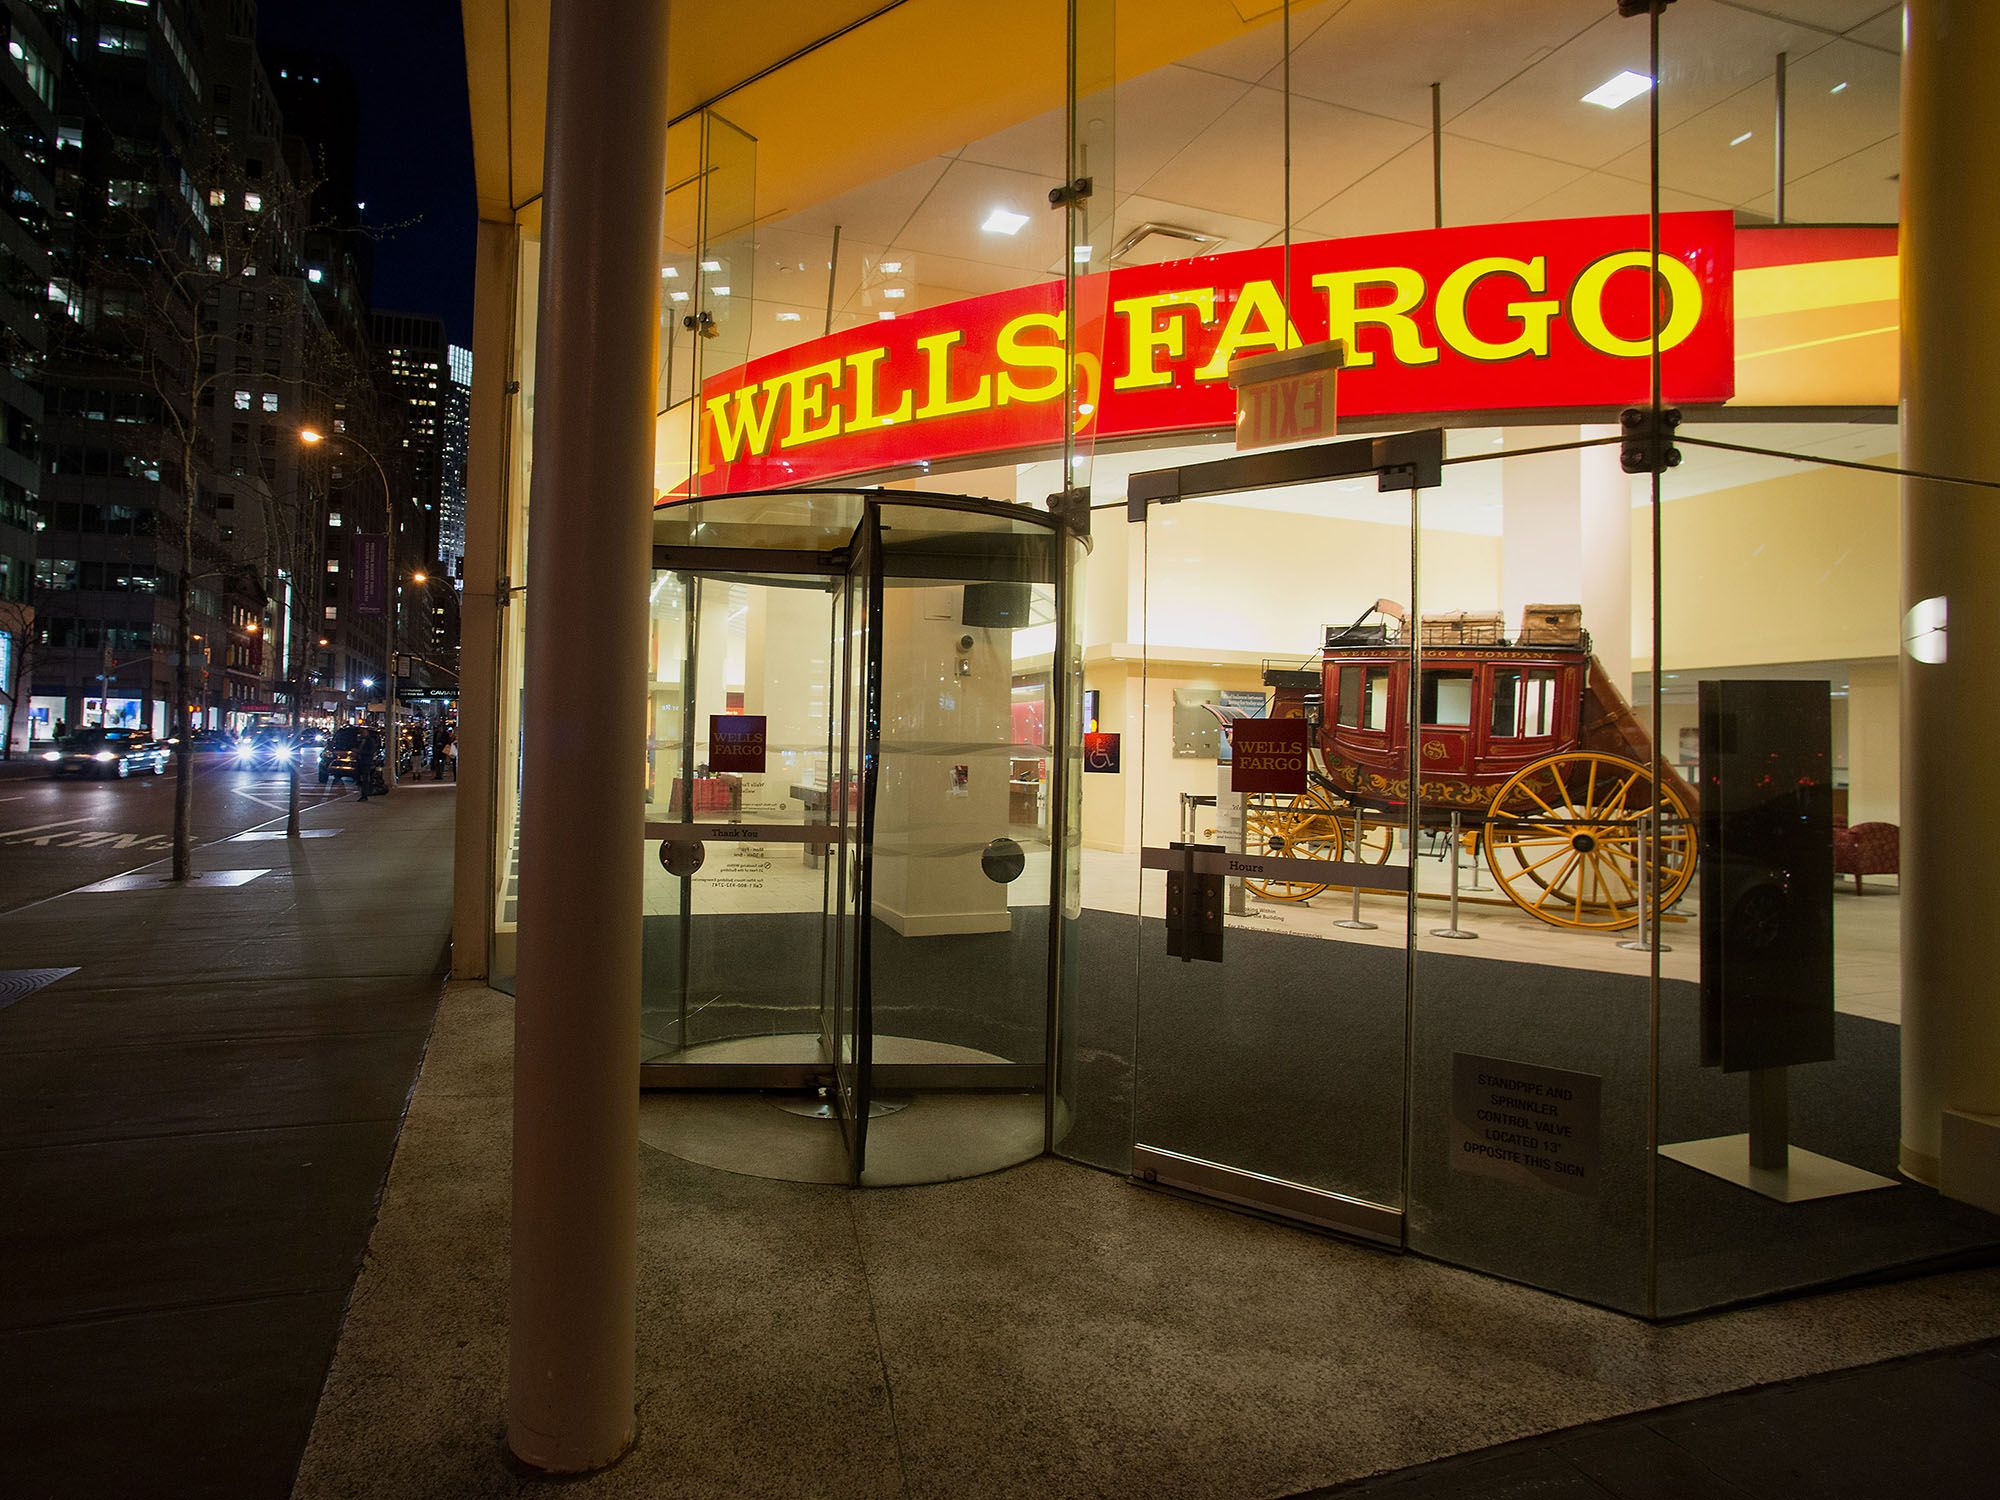 Pedestrians pass in front of a Wells Fargo & Co. bank branch at night in New York. Photographer: Craig Warga/Bloomberg